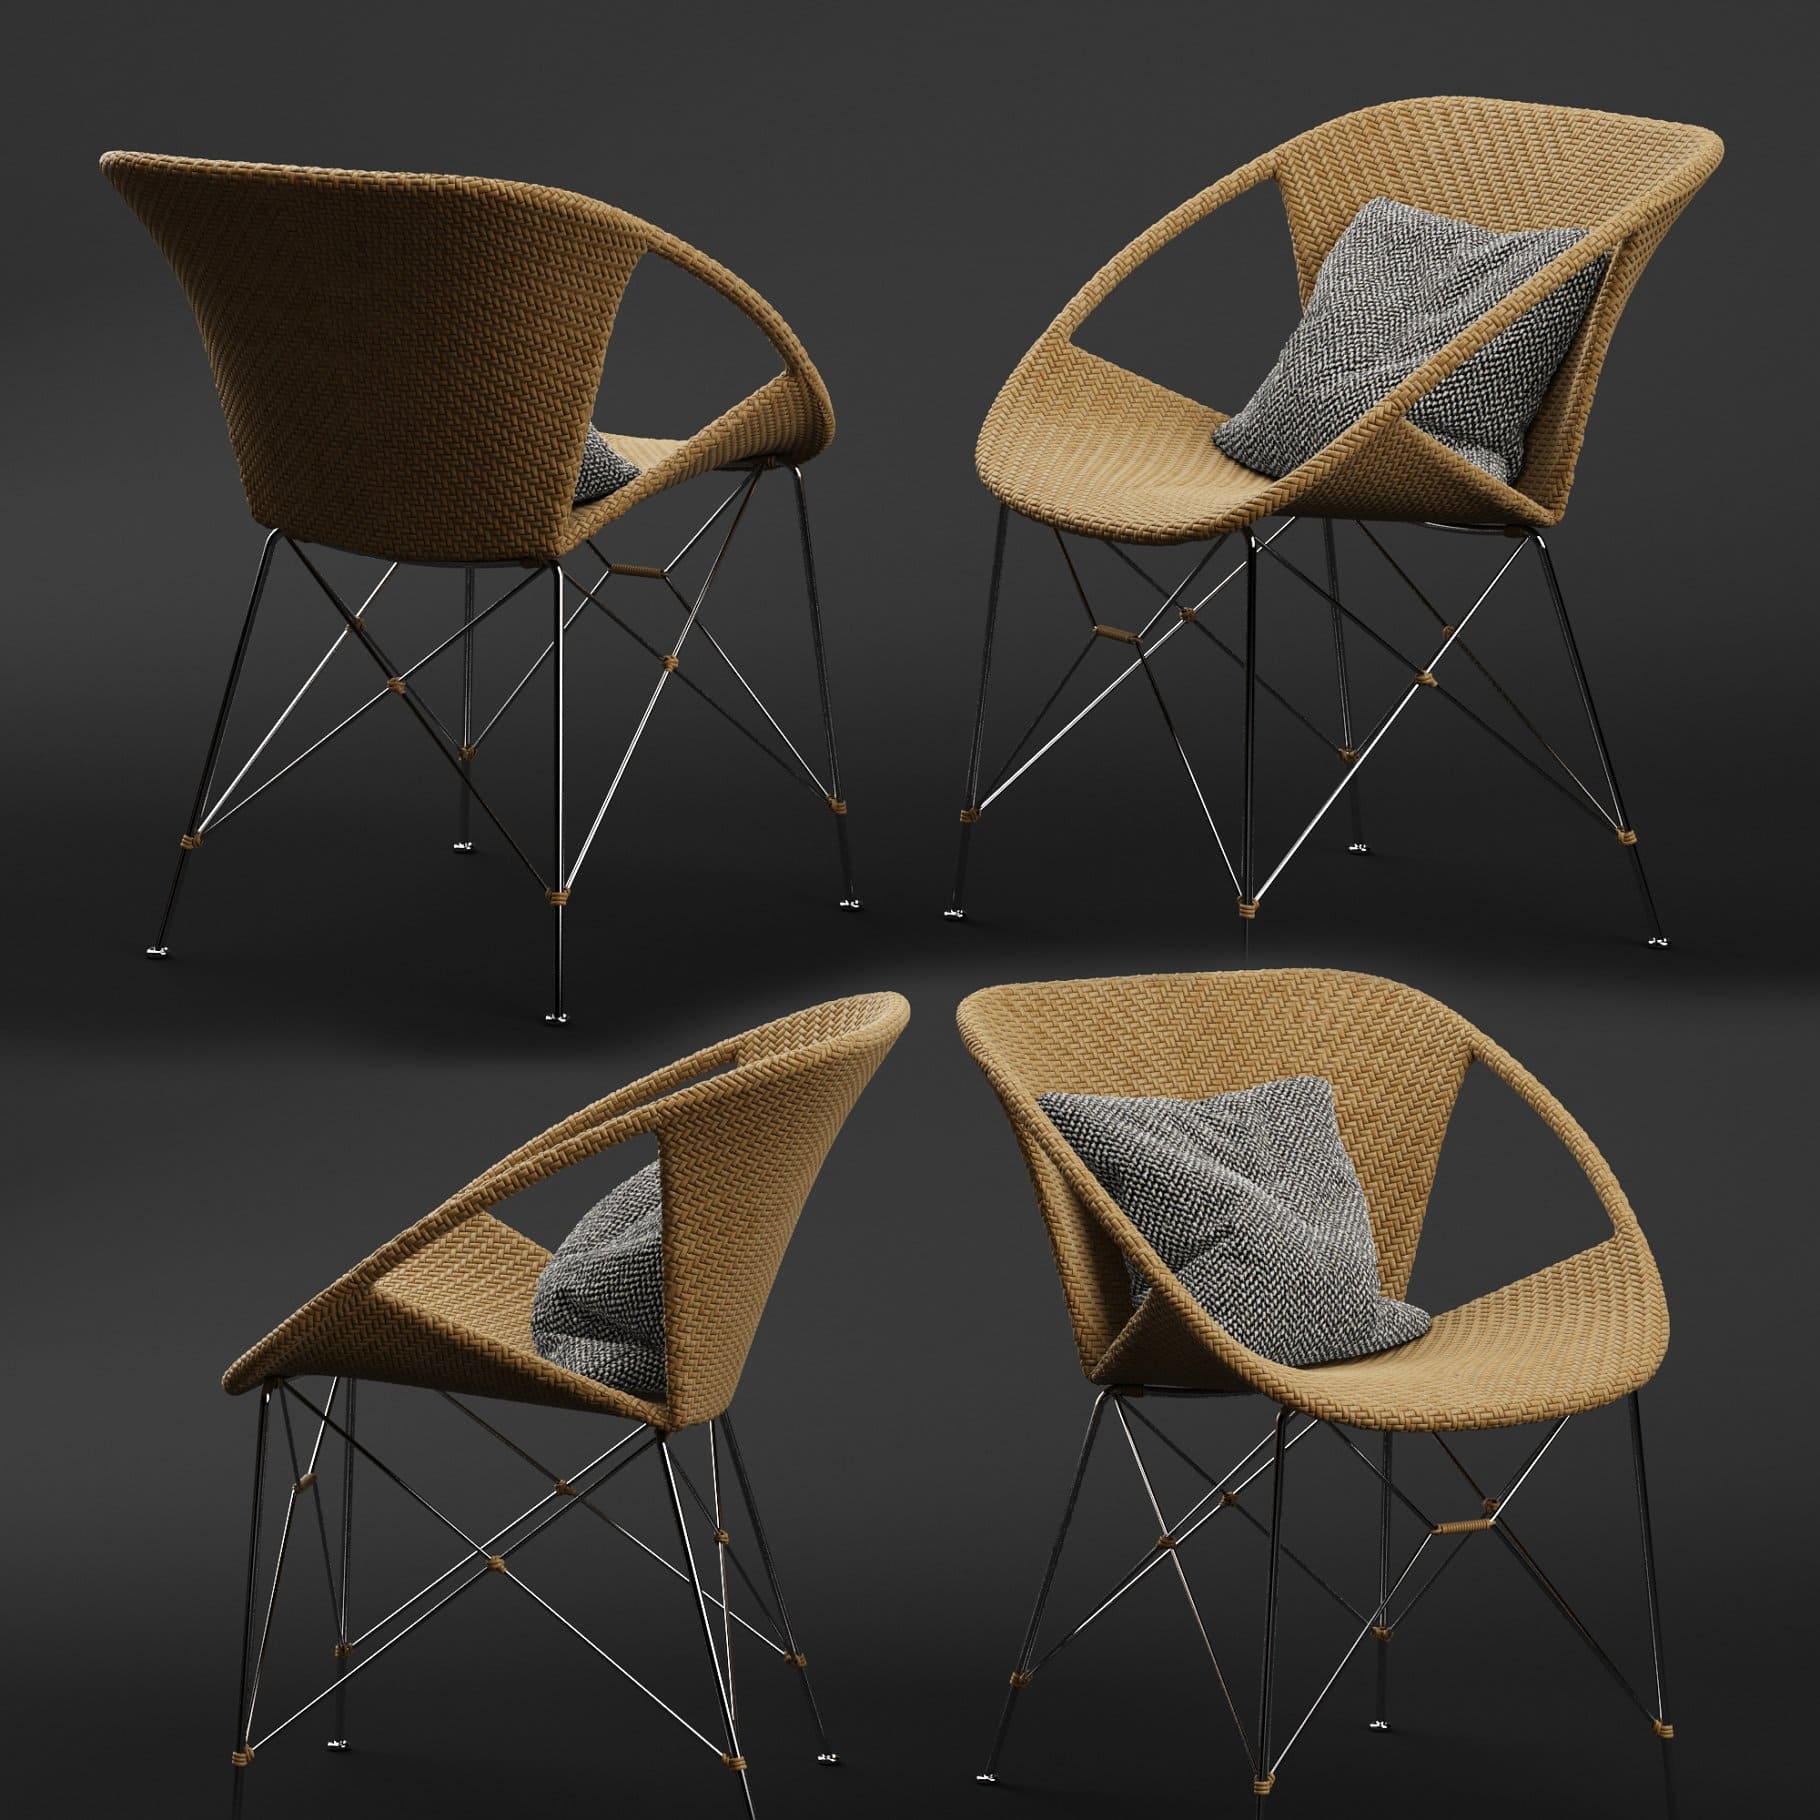 Suki frame chair with weaving from four angles.